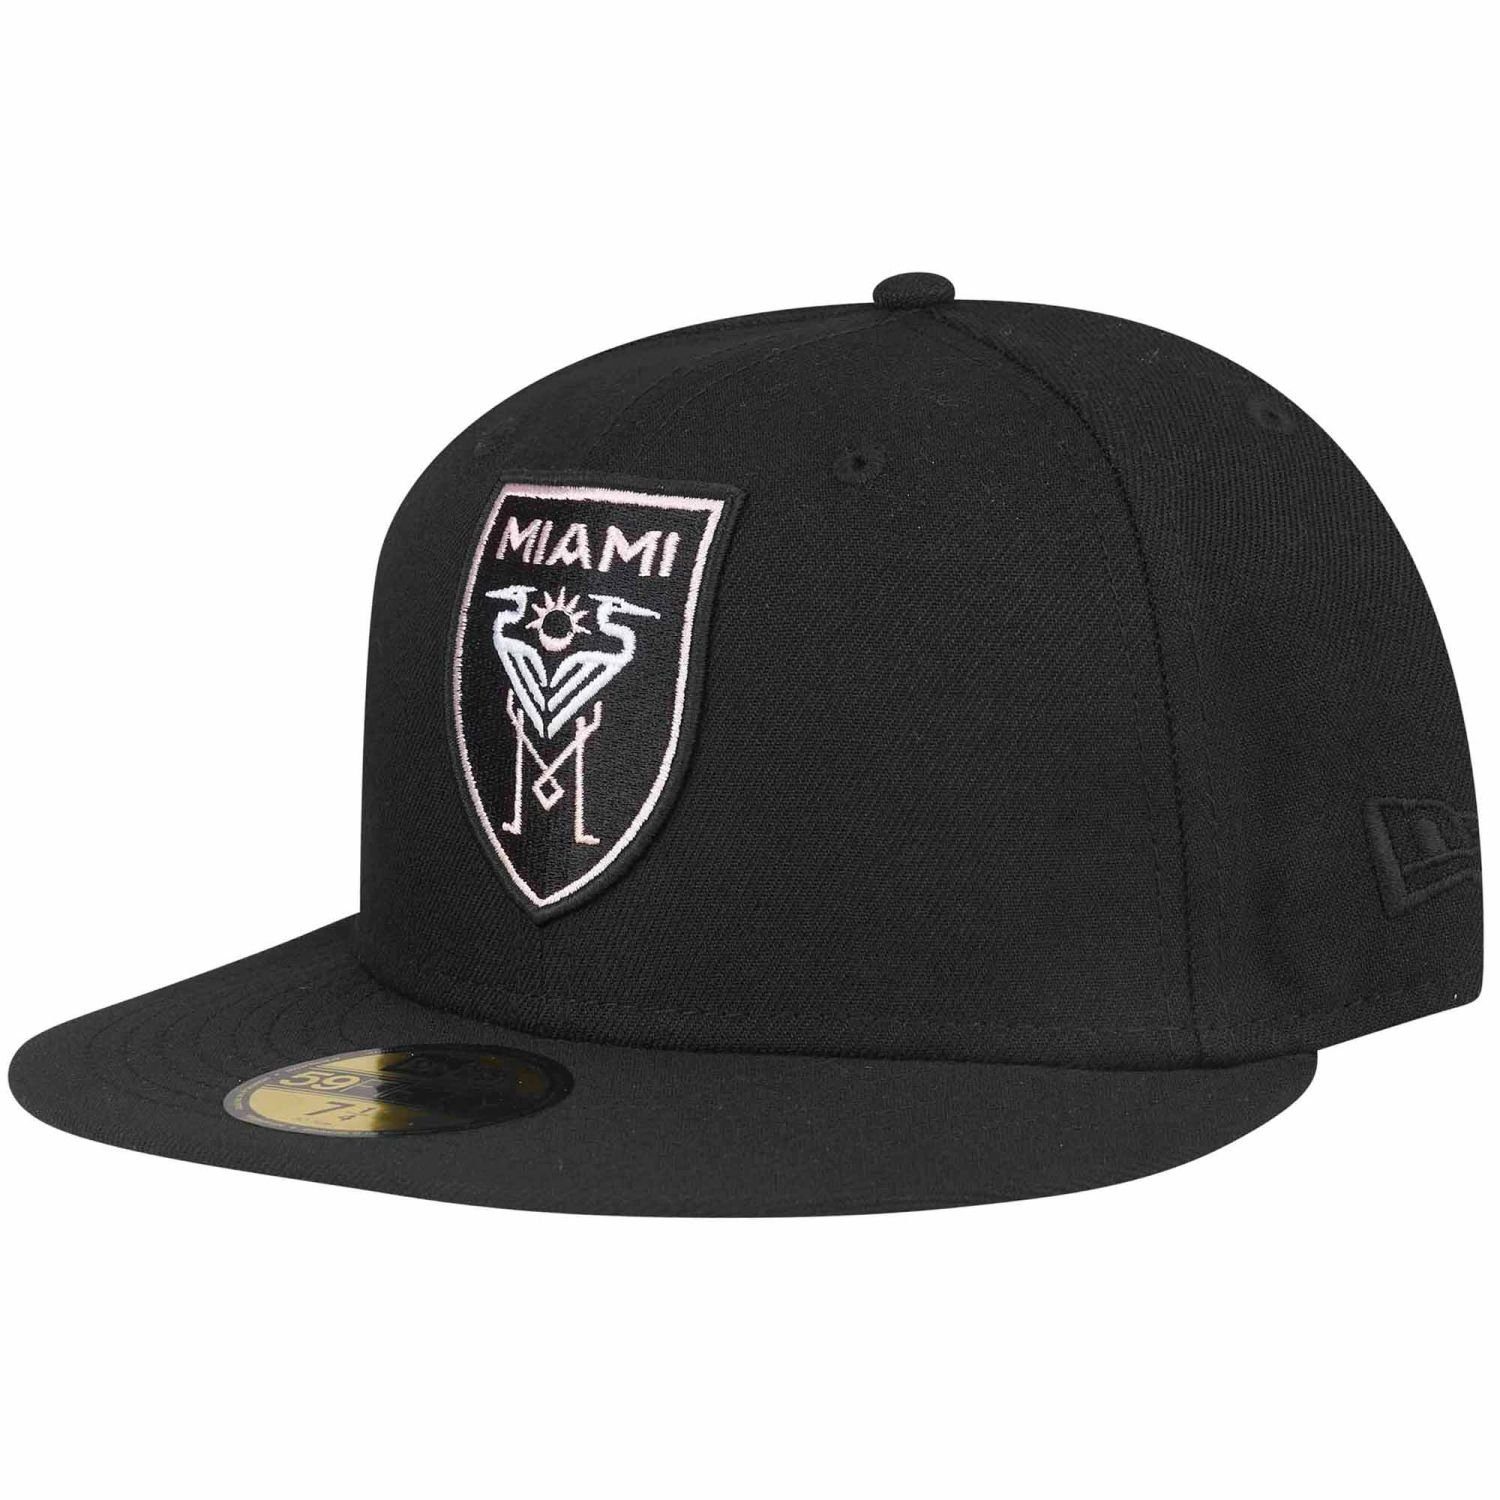 Cap 59Fifty Miami New MLS Era Fitted Inter